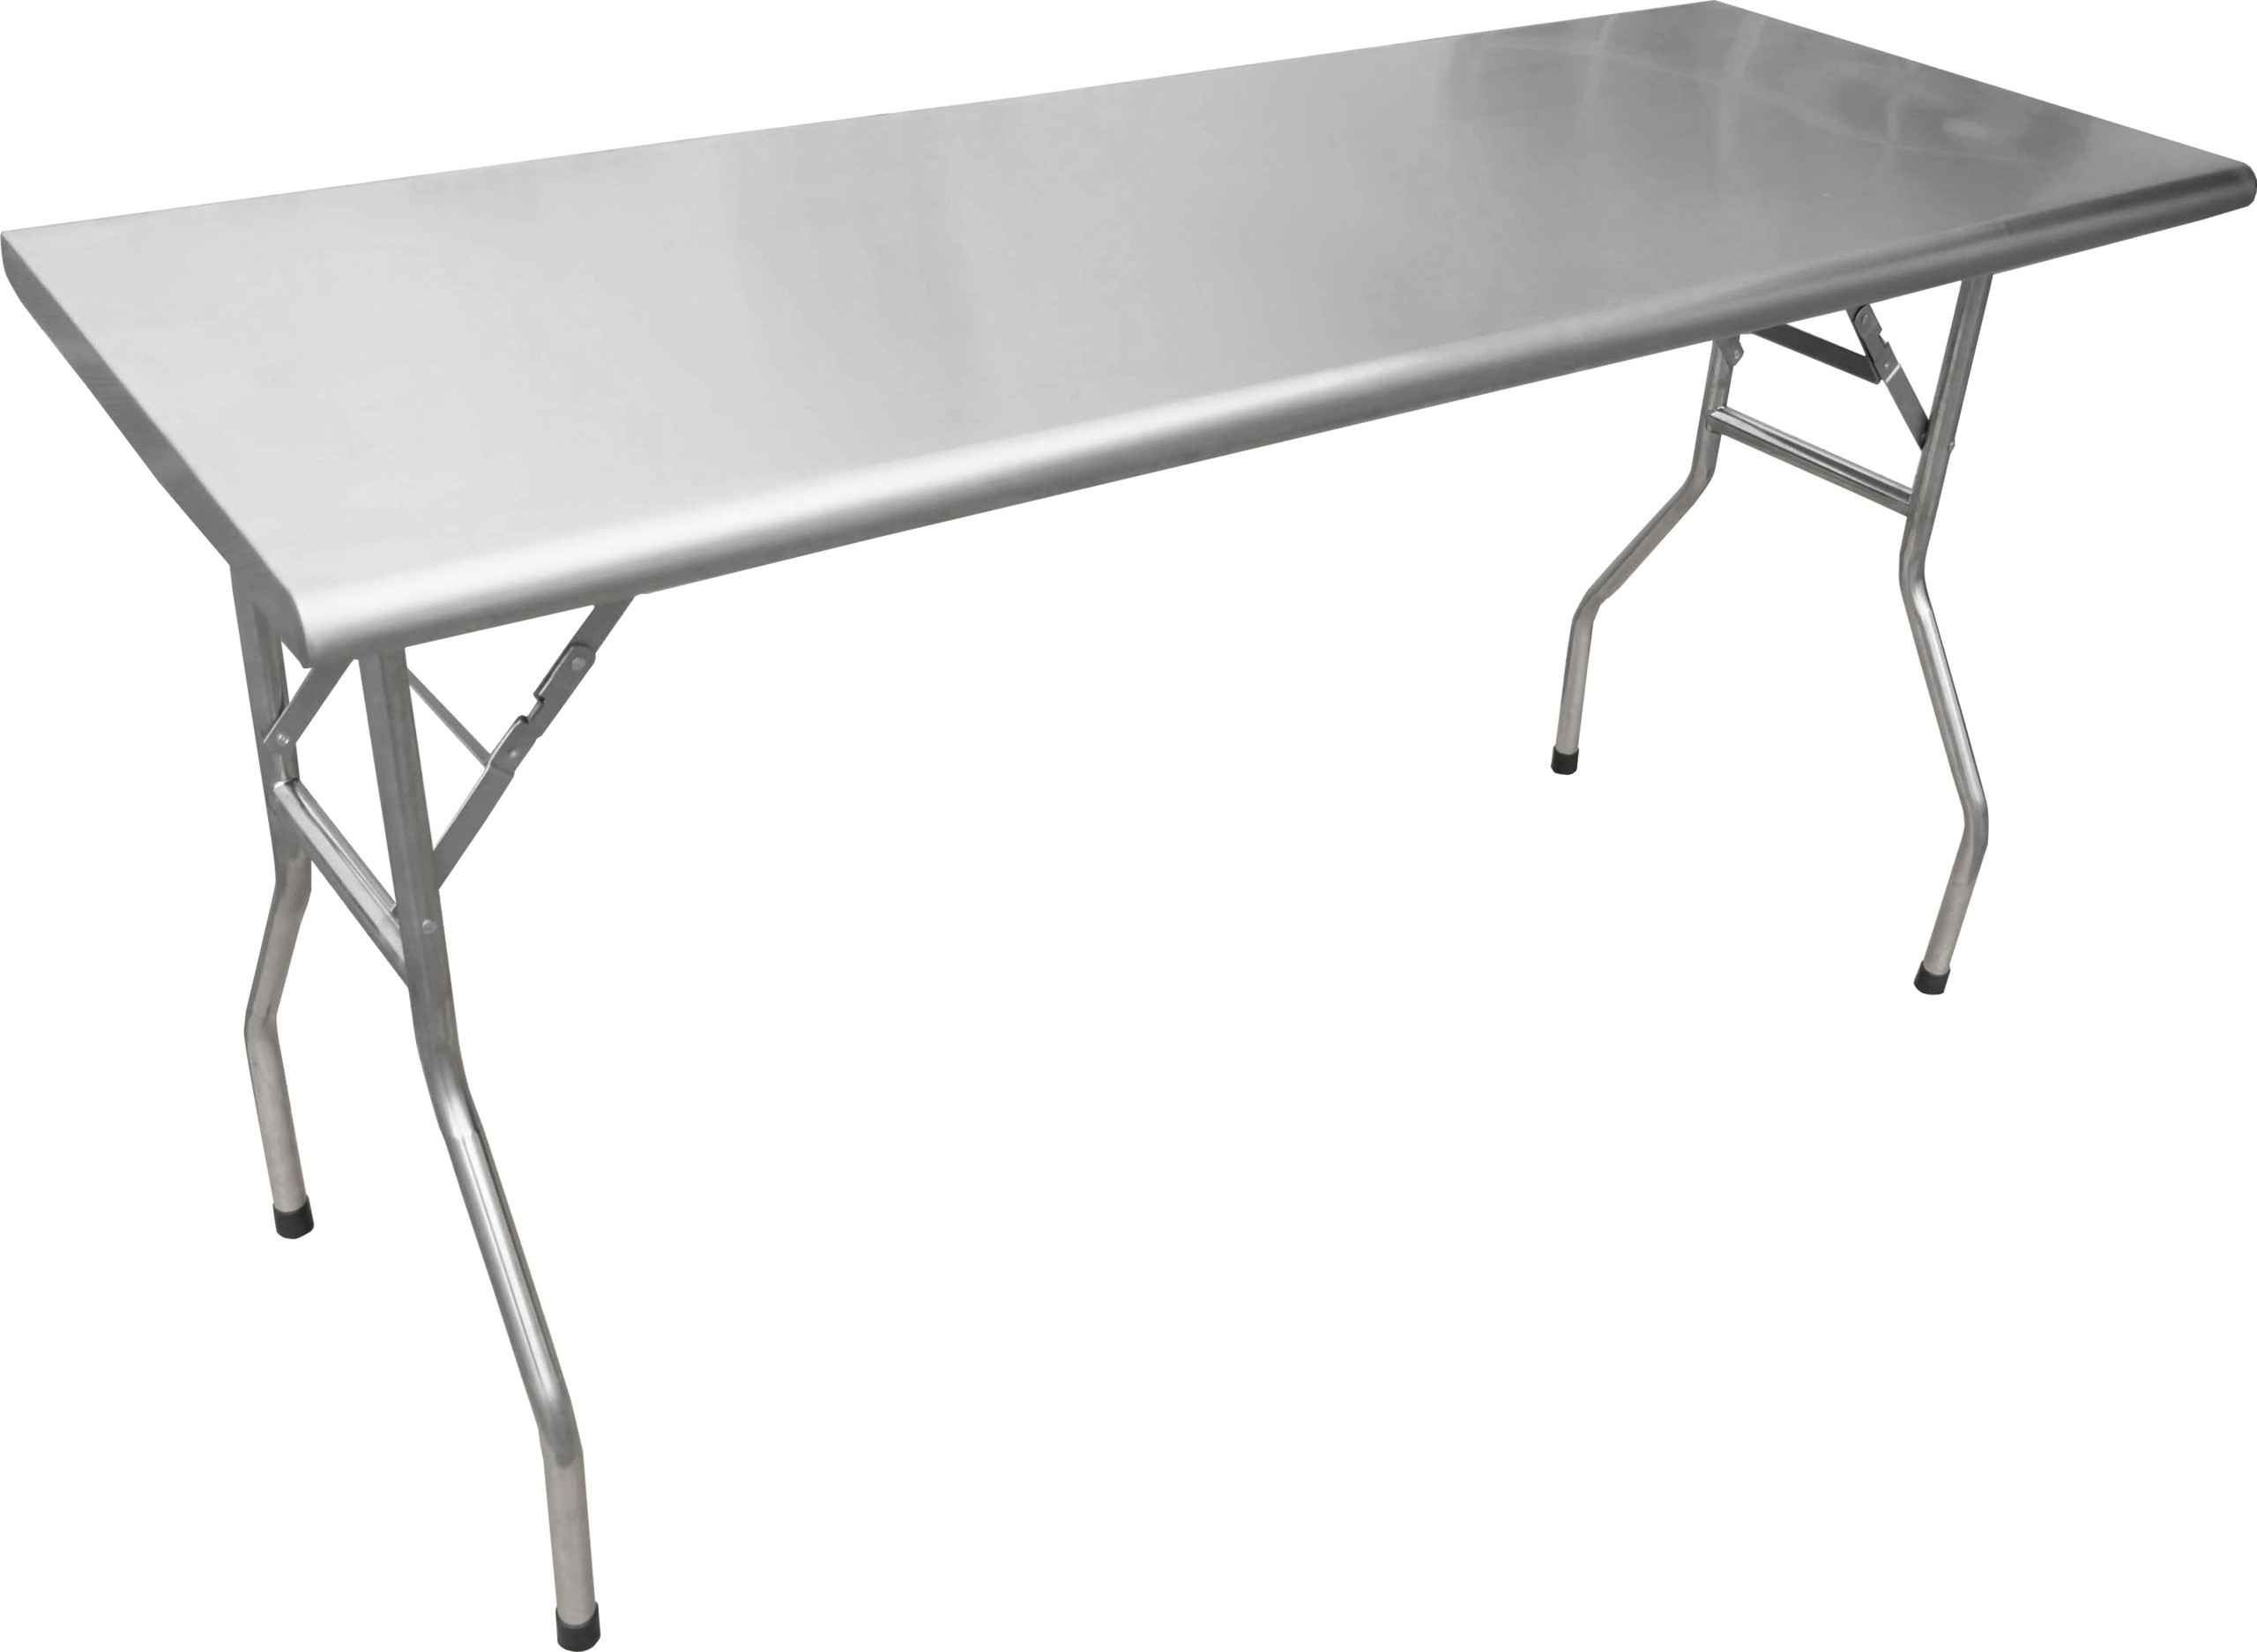 Omcan 30 x 60 stainless steel folding table 41232